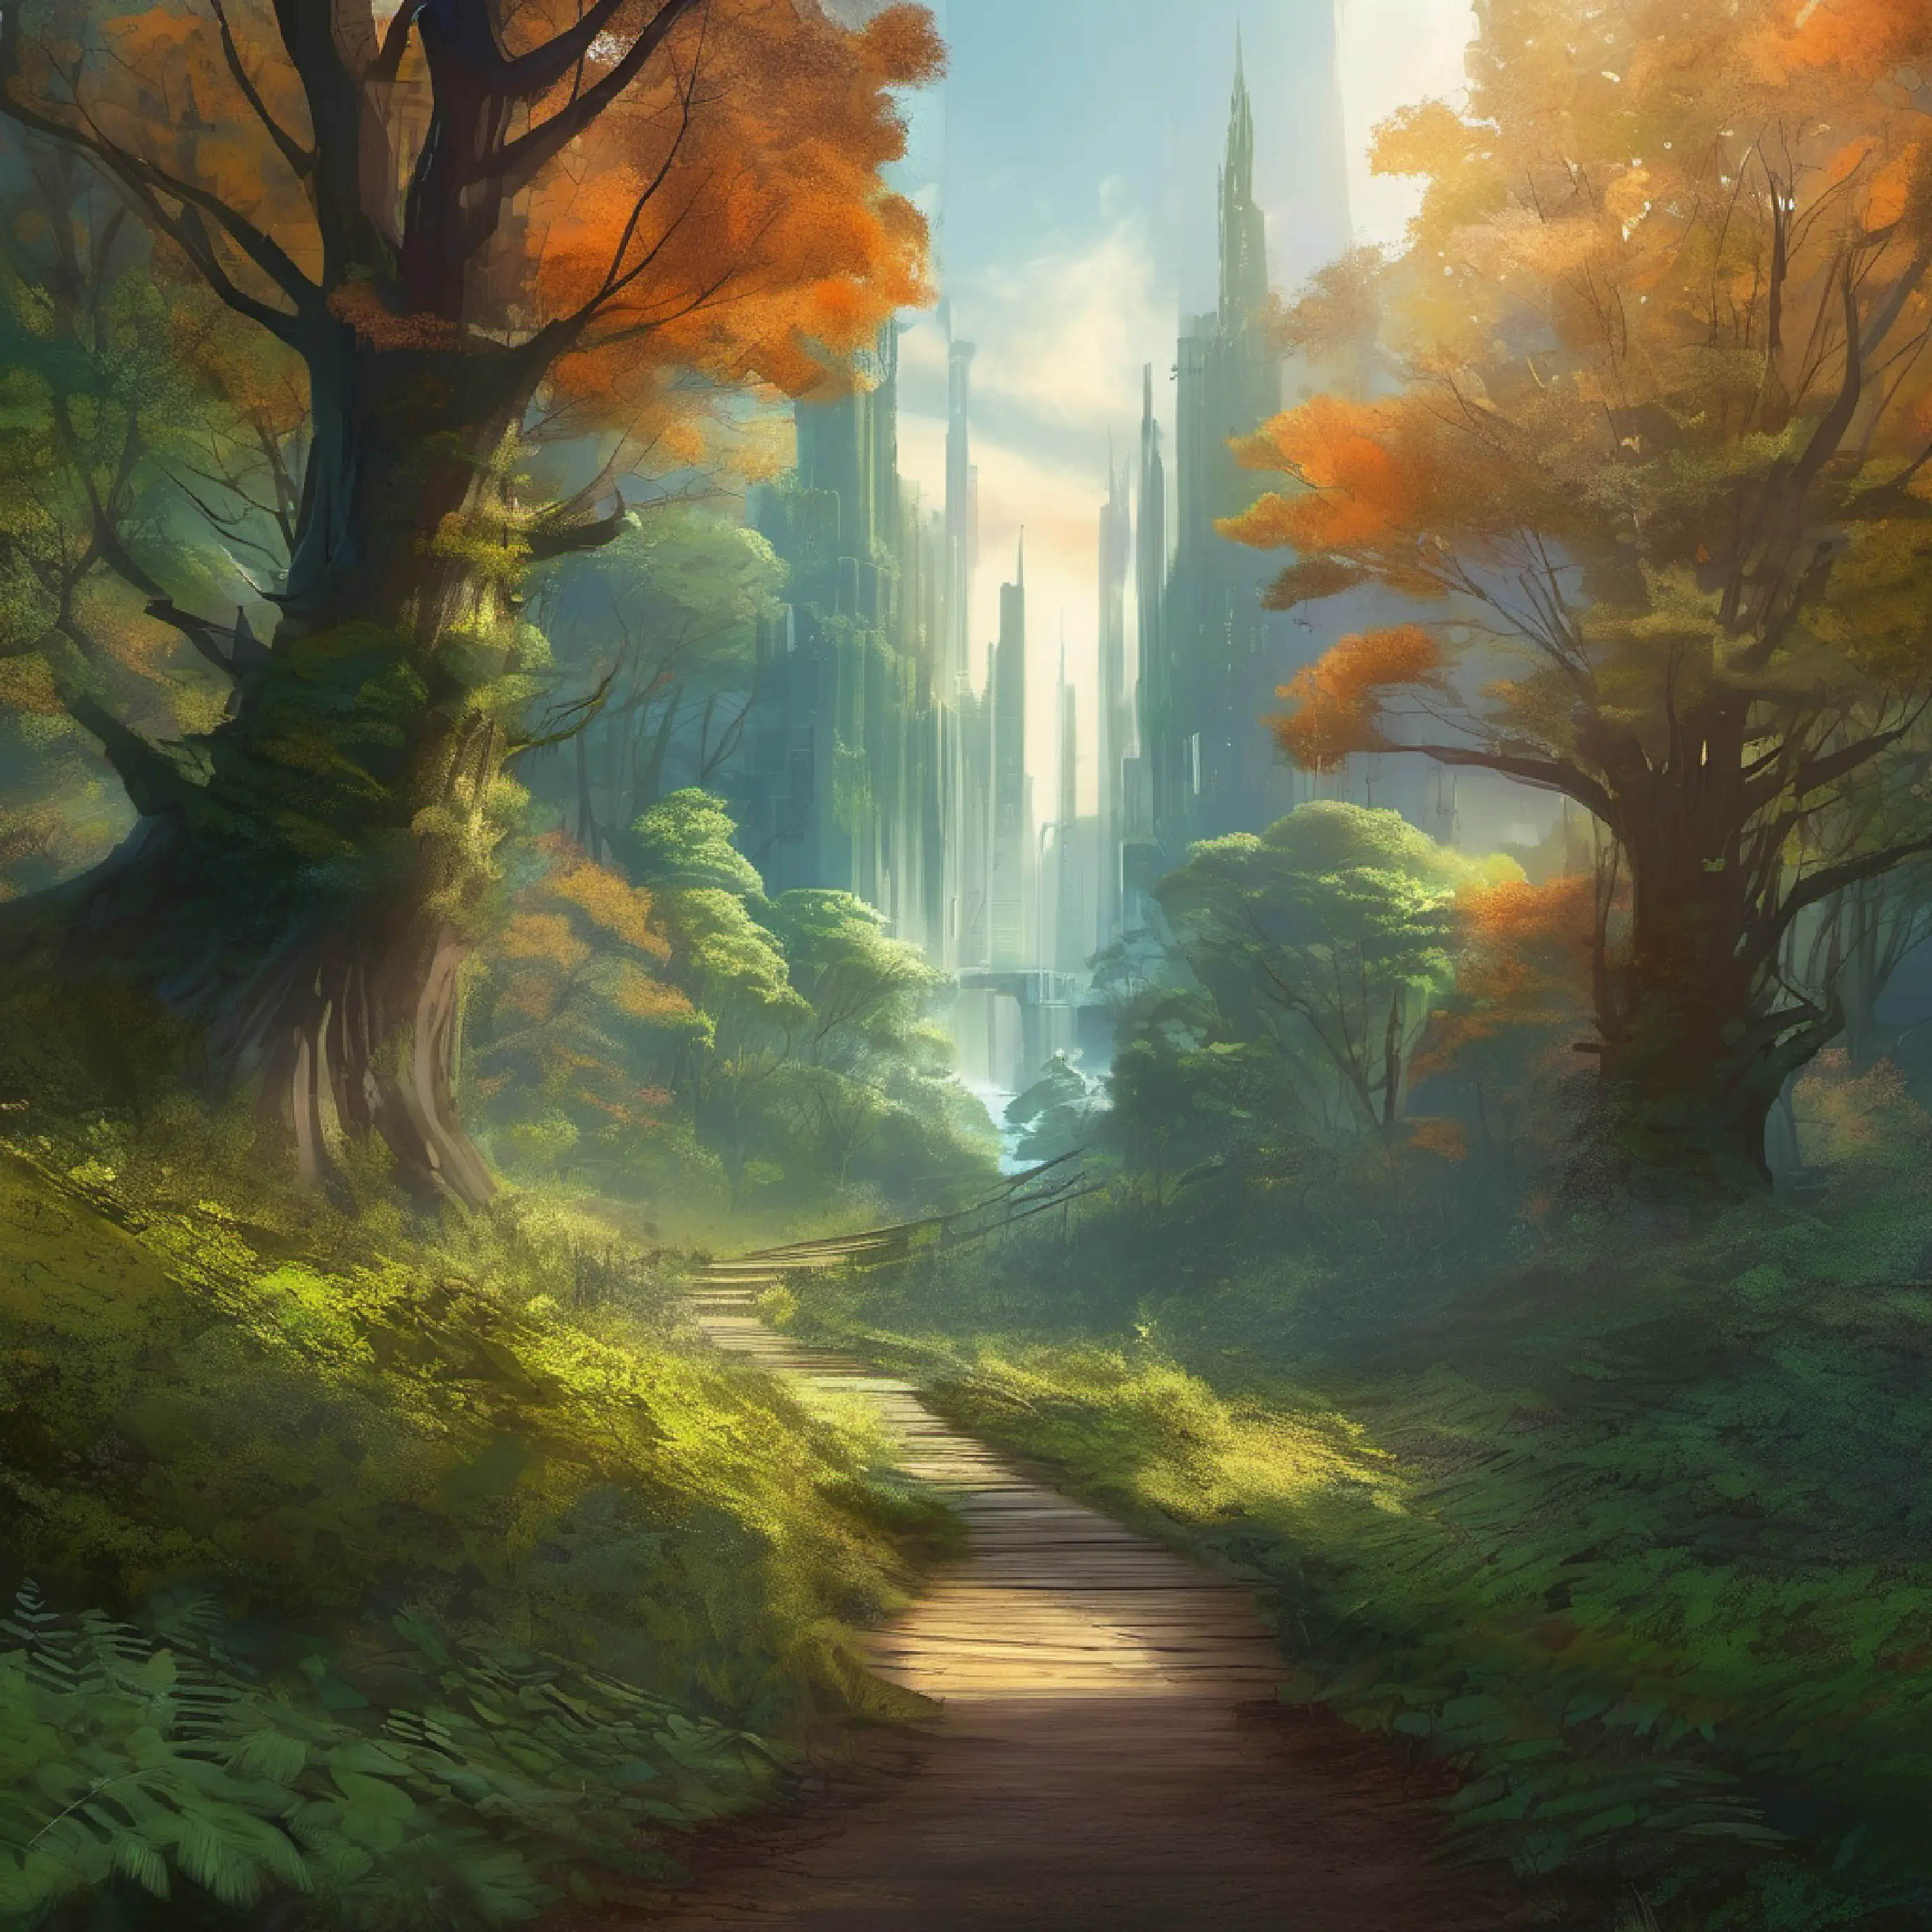 Entering the forest, the city's boundary fades.